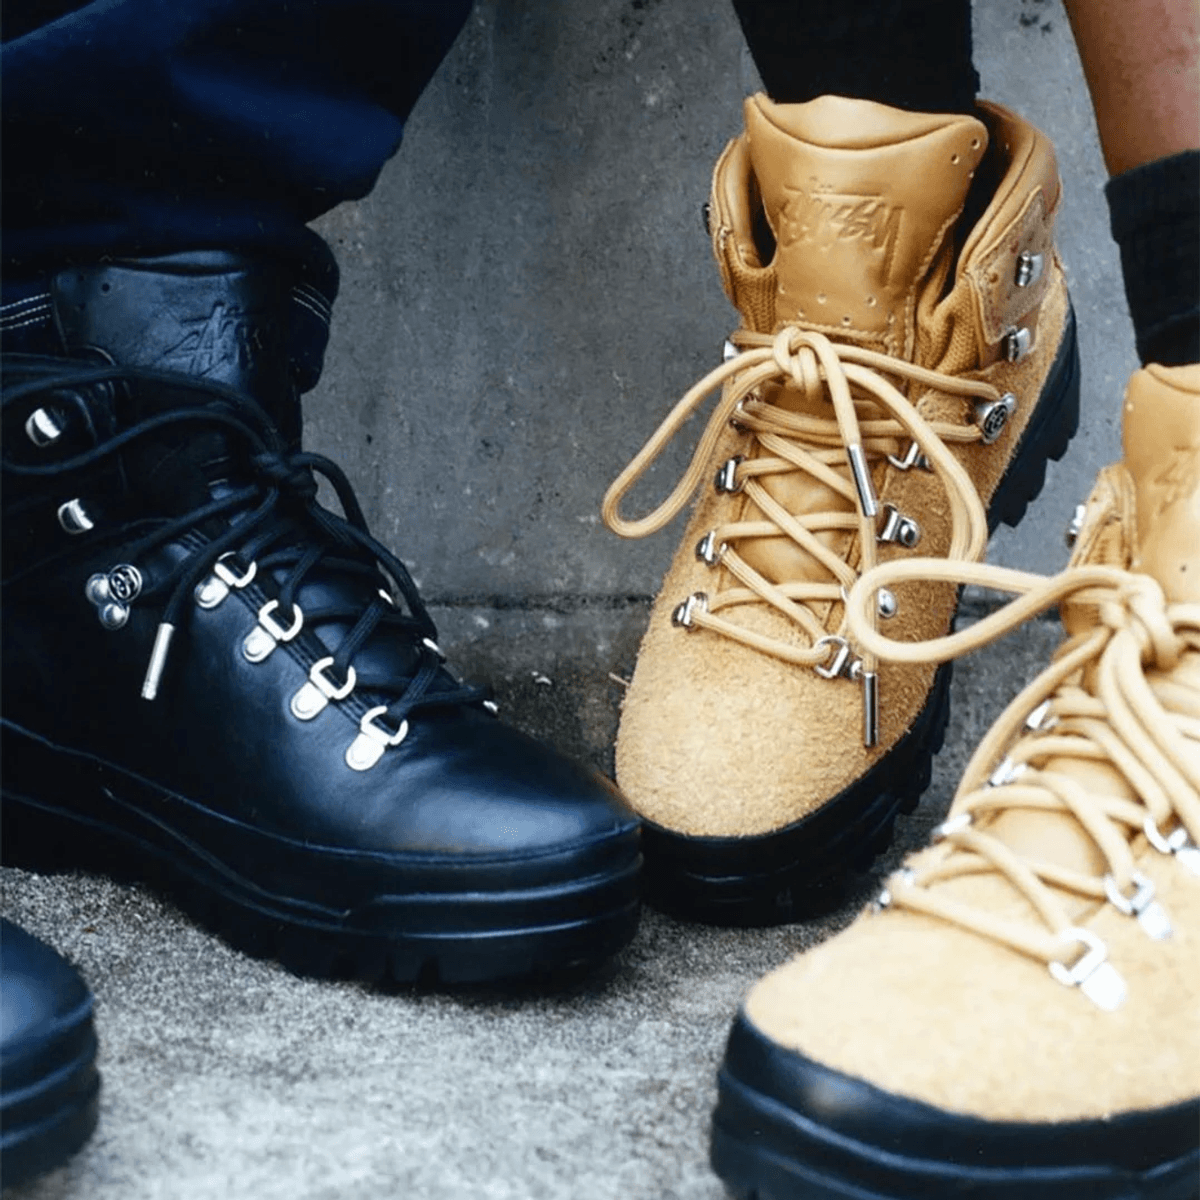 Stussy x Timberland Release a Brand New Hiker Boot Collection